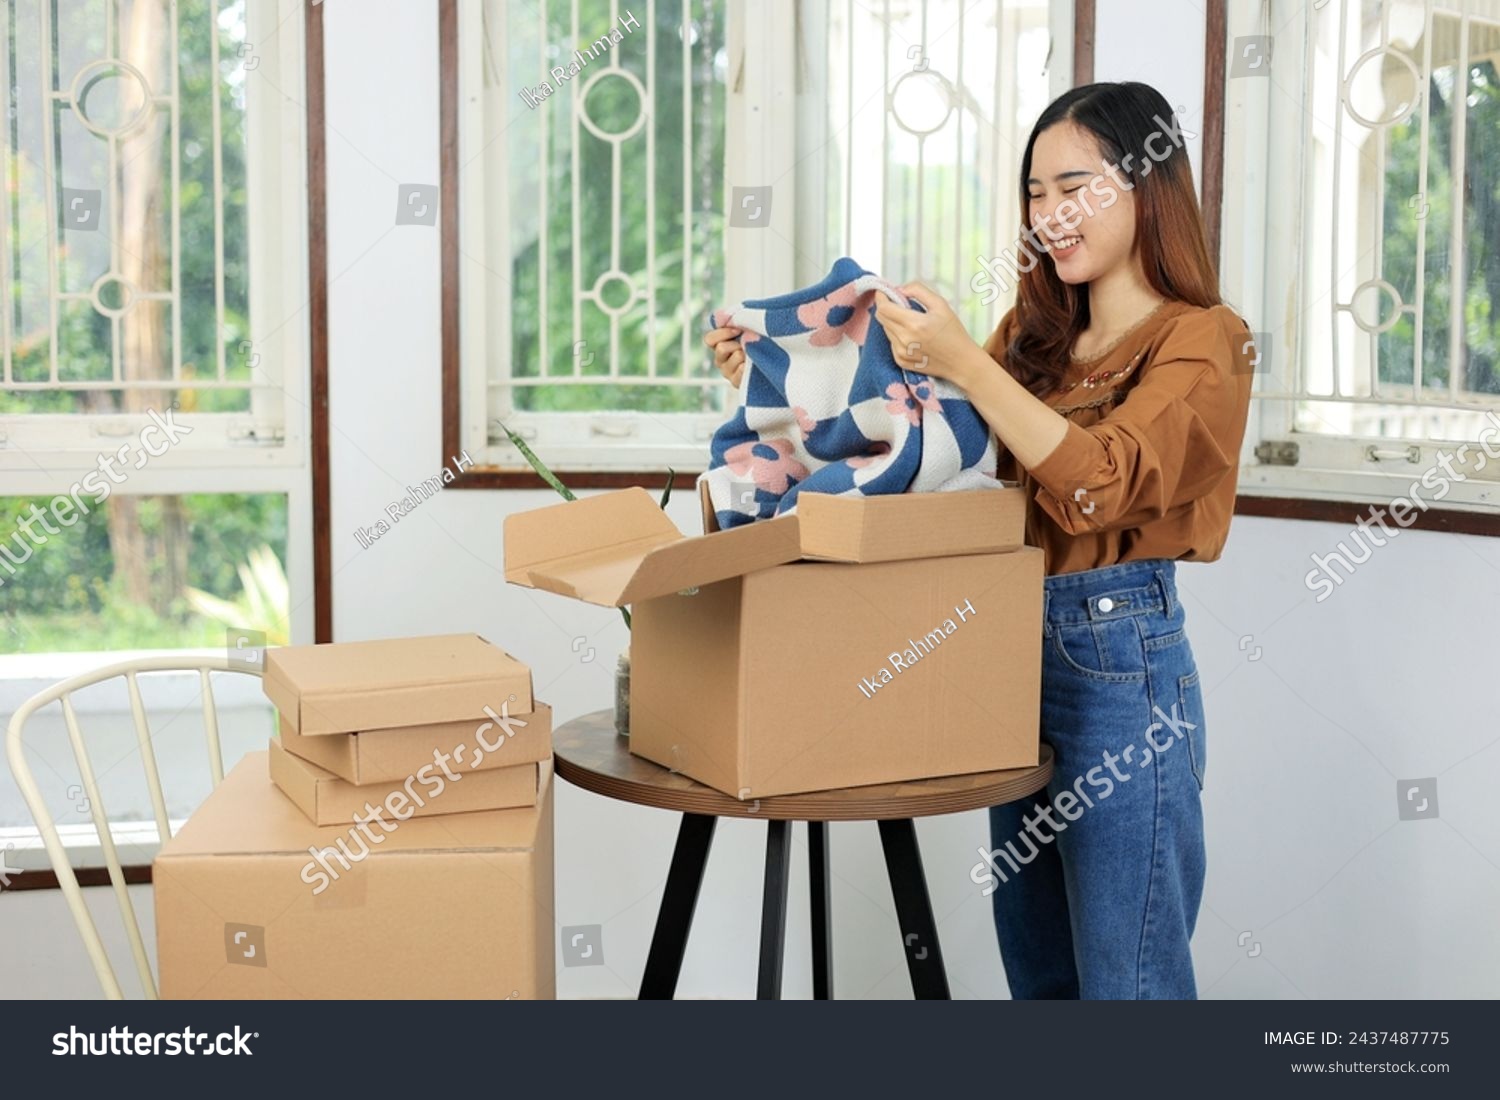 Asian Female Standing with Opened Cartoon Box, Unboxing Product from Online Store with Happy Face. Online Shopping Concept #2437487775